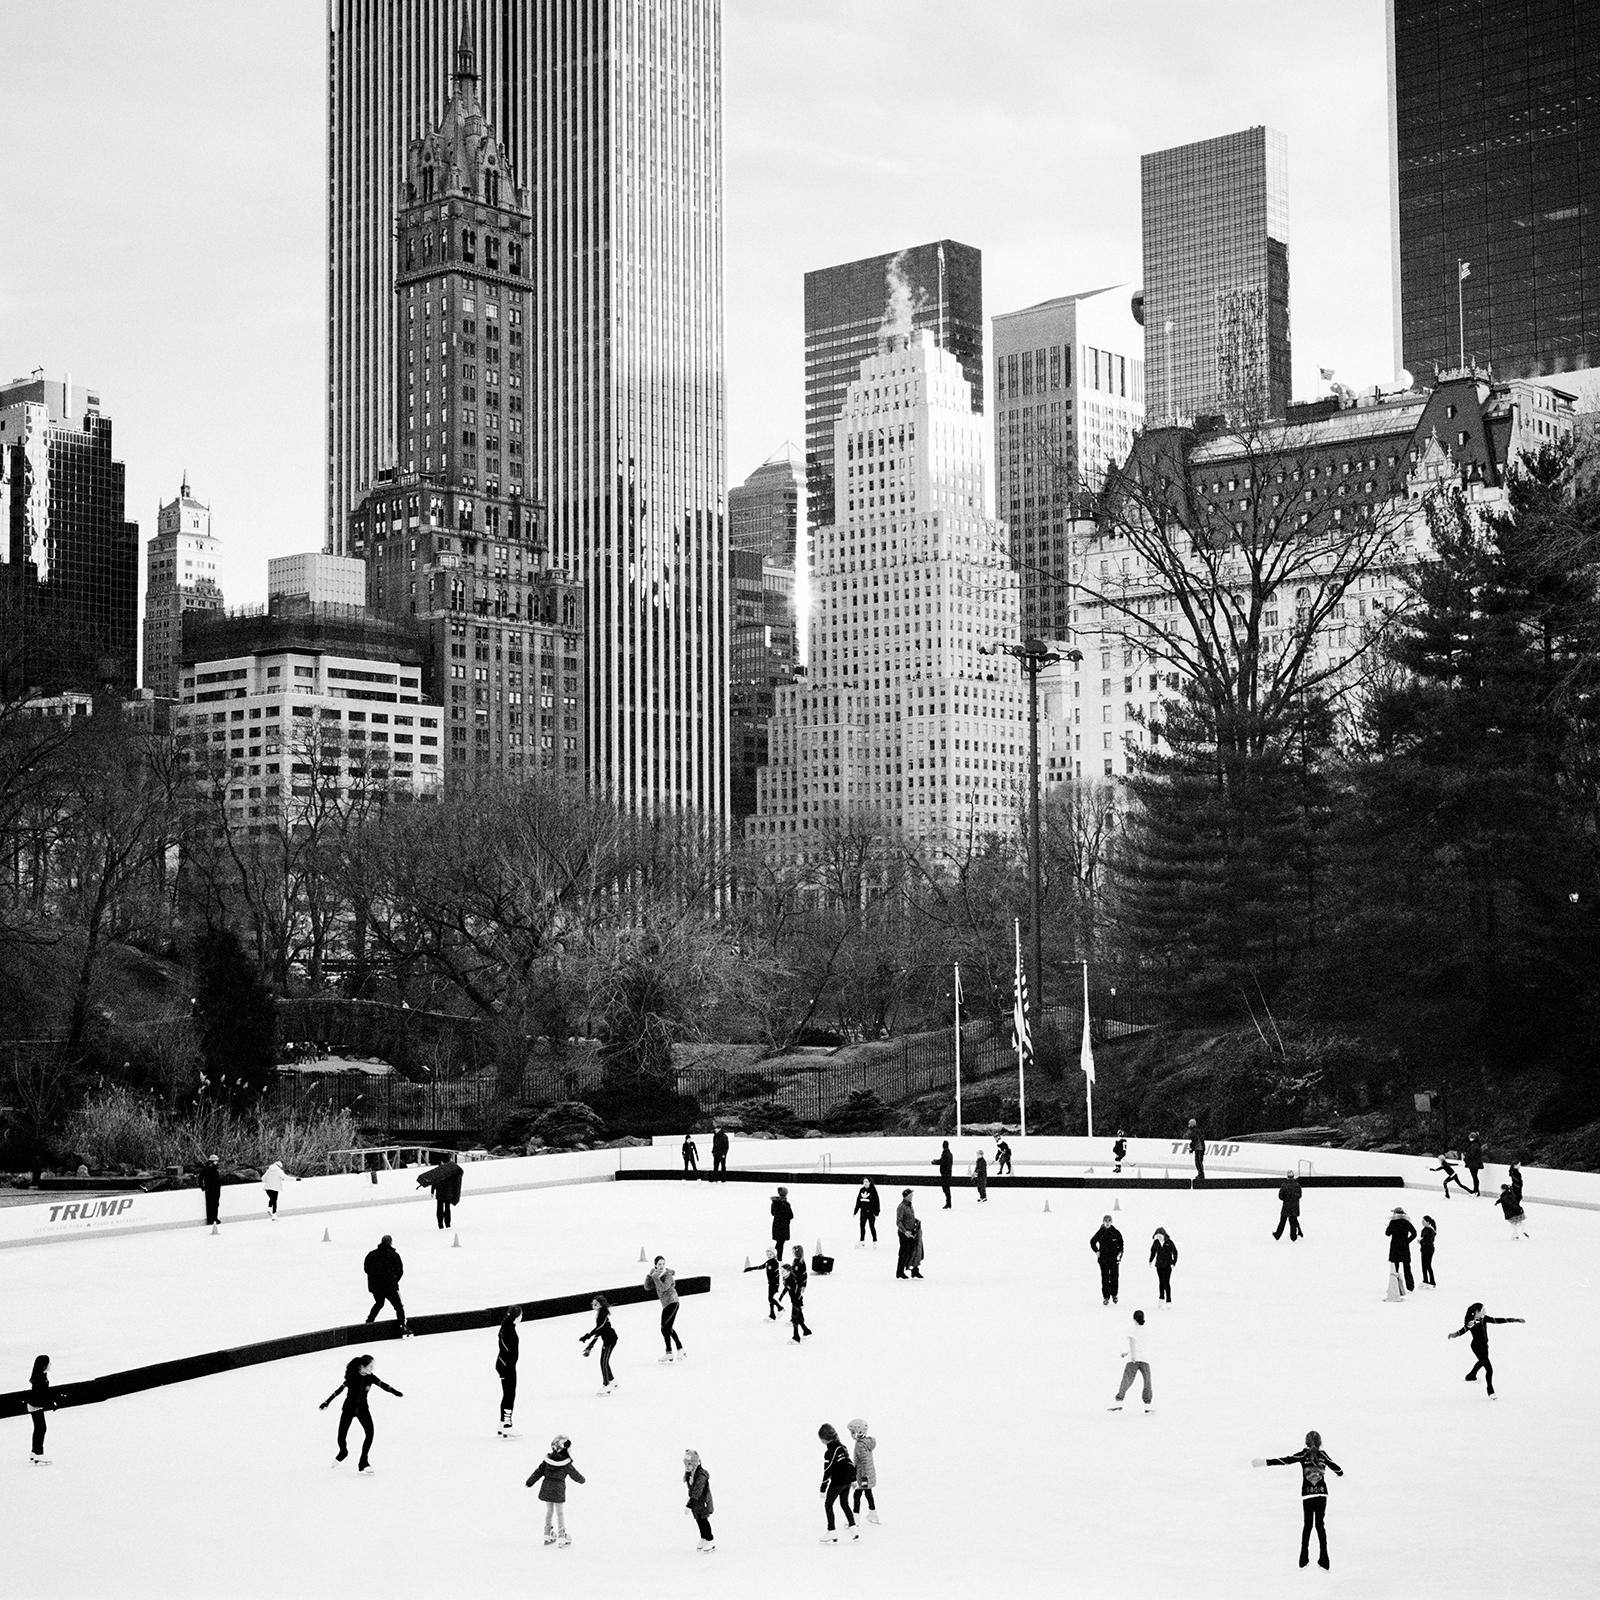 Black and white fine art cityscape - landscape photography. Ice Skating, Central Park, New York City, USA. Archival pigment ink print, edition of 9. Signed, titled, dated and numbered by artist. Certificate of authenticity included. Printed with 4cm